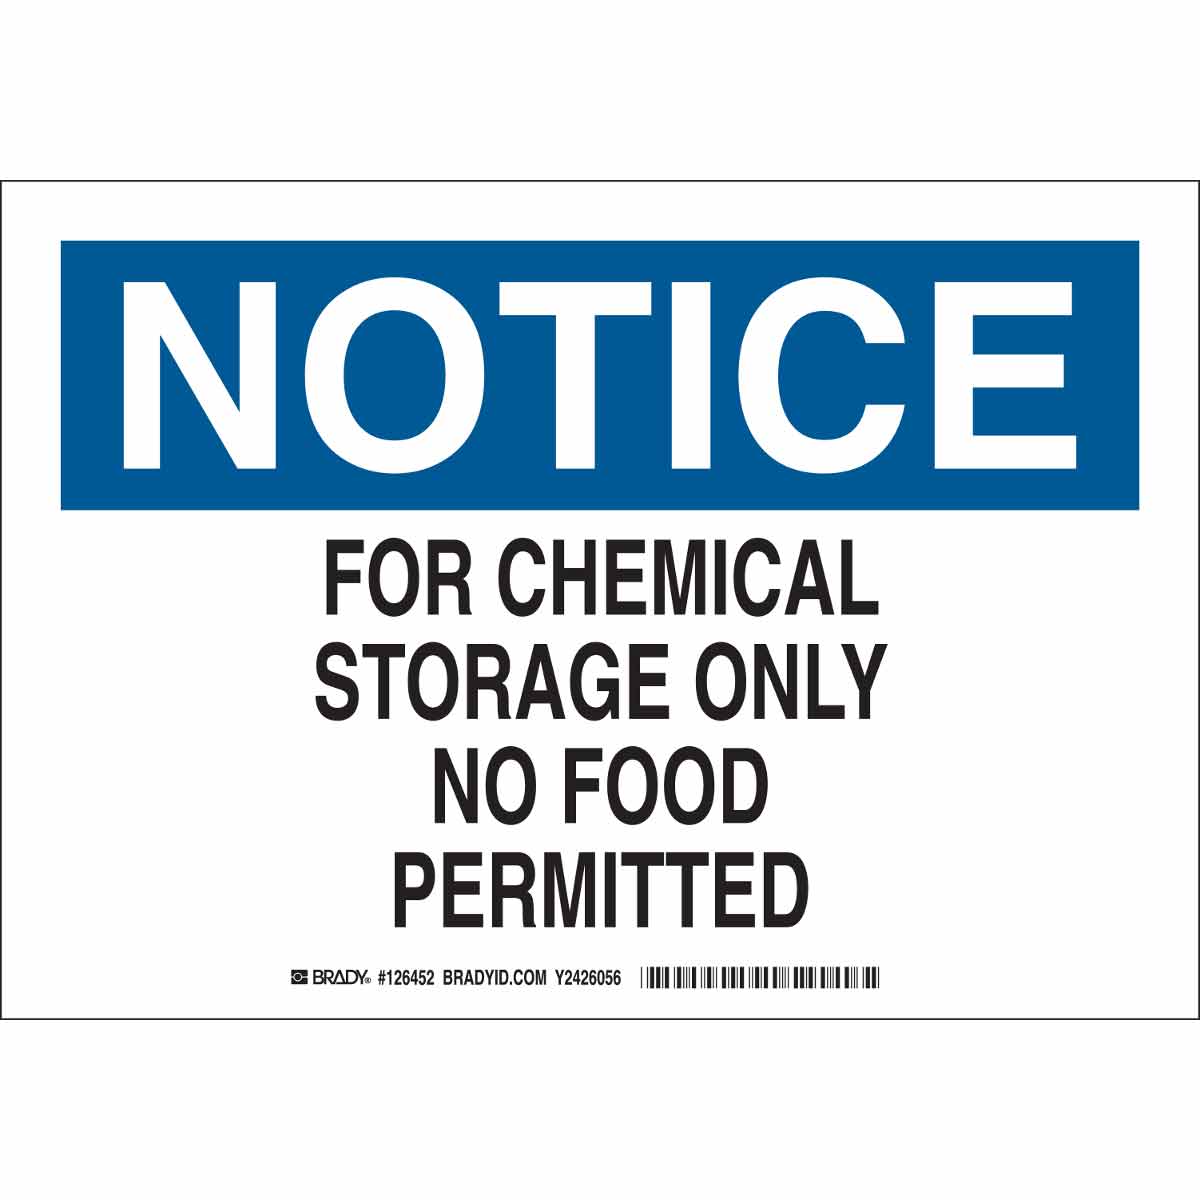 OSHA NOTICE SAFETY SIGN FOR CHEMICAL STORAGE ONLY NO FOOD PERMITTED 10x14 